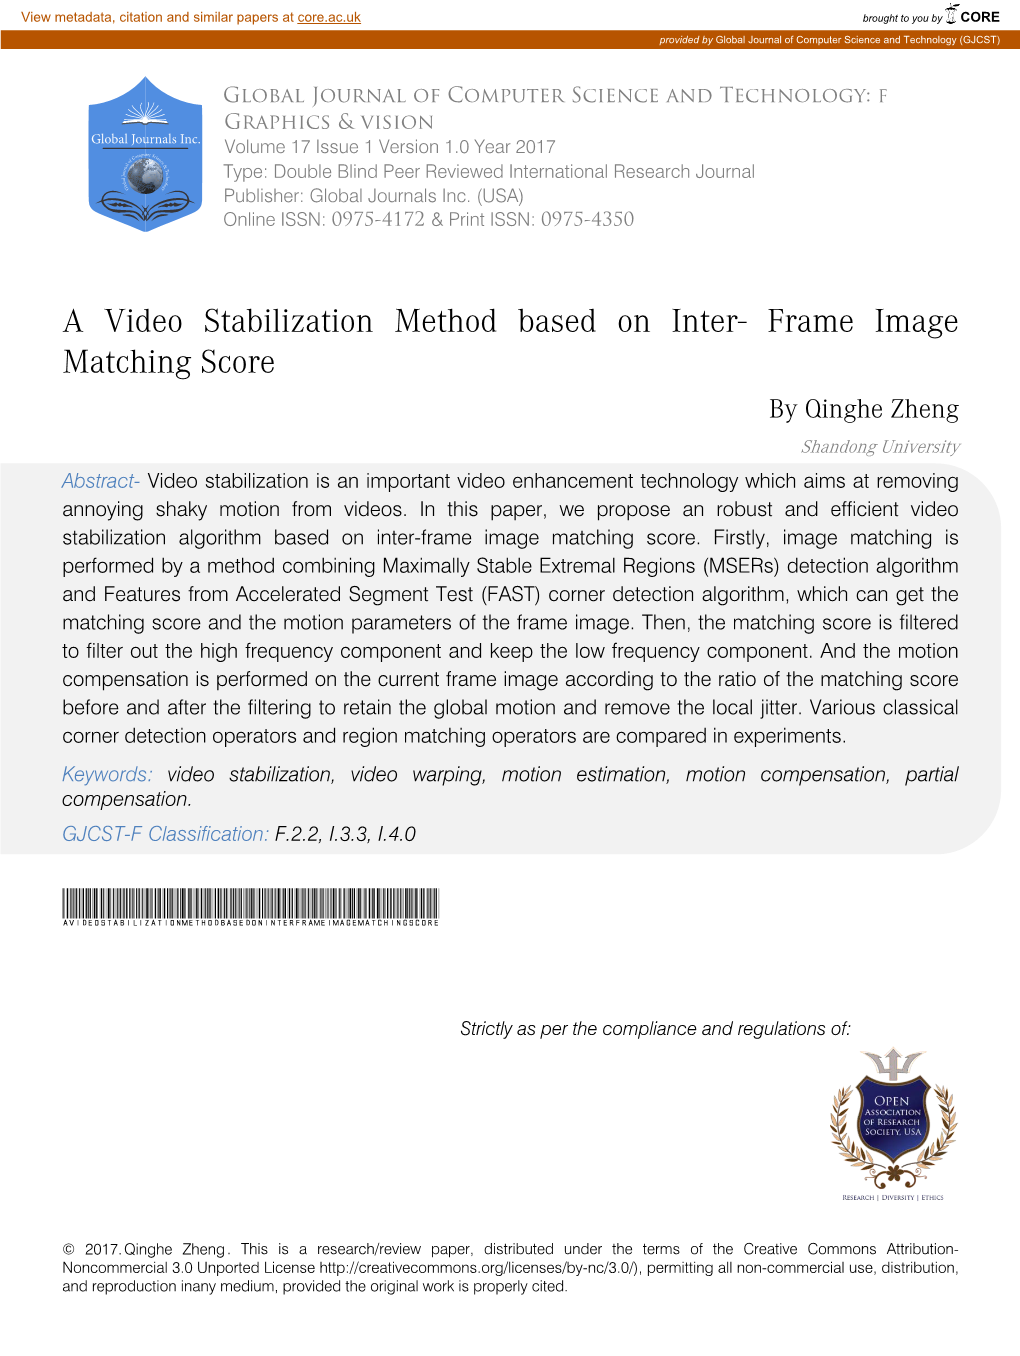 A Video Stabilization Method Based on Inter-Frame Image Matching Score